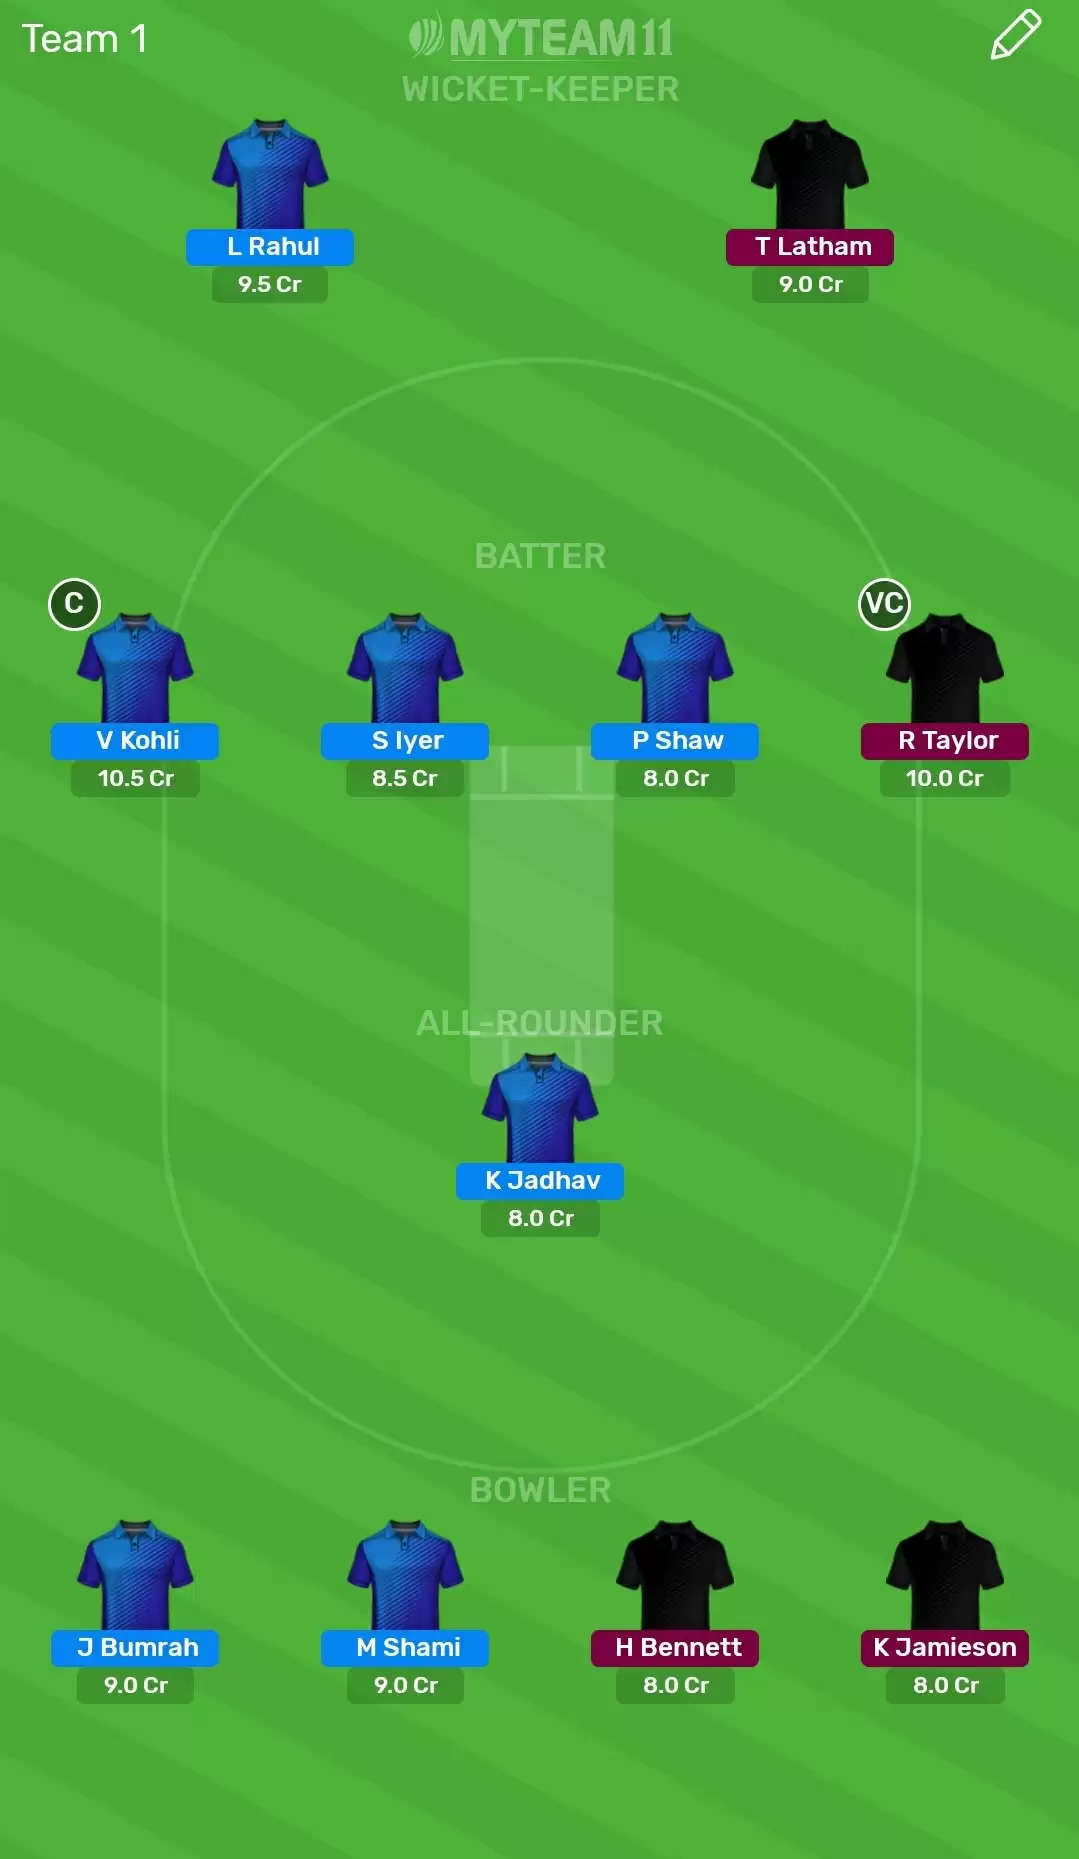 NZ vs IND Dream11 Fantasy Cricket Prediction – 2nd ODI: New Zealand vs India Dream11 Team, Preview, Probable Playing XI, Pitch Report and Weather Conditions